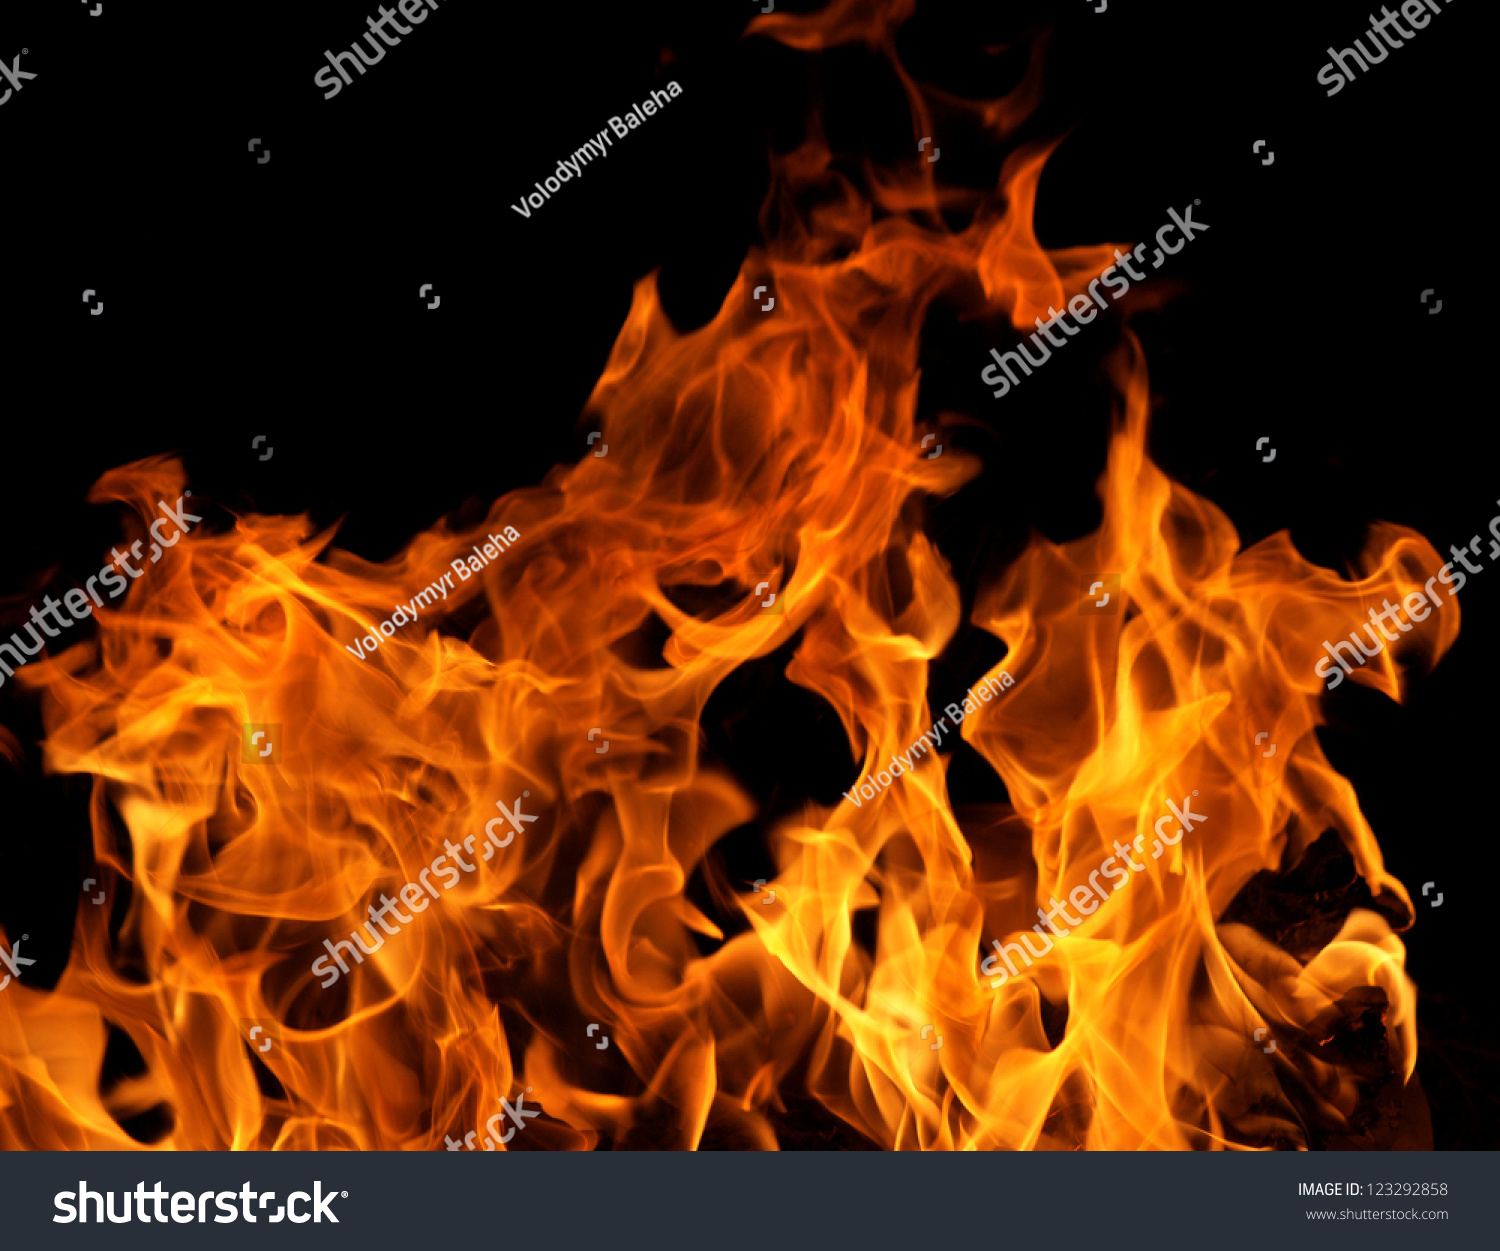 Fire flames isolated on a black background #123292858